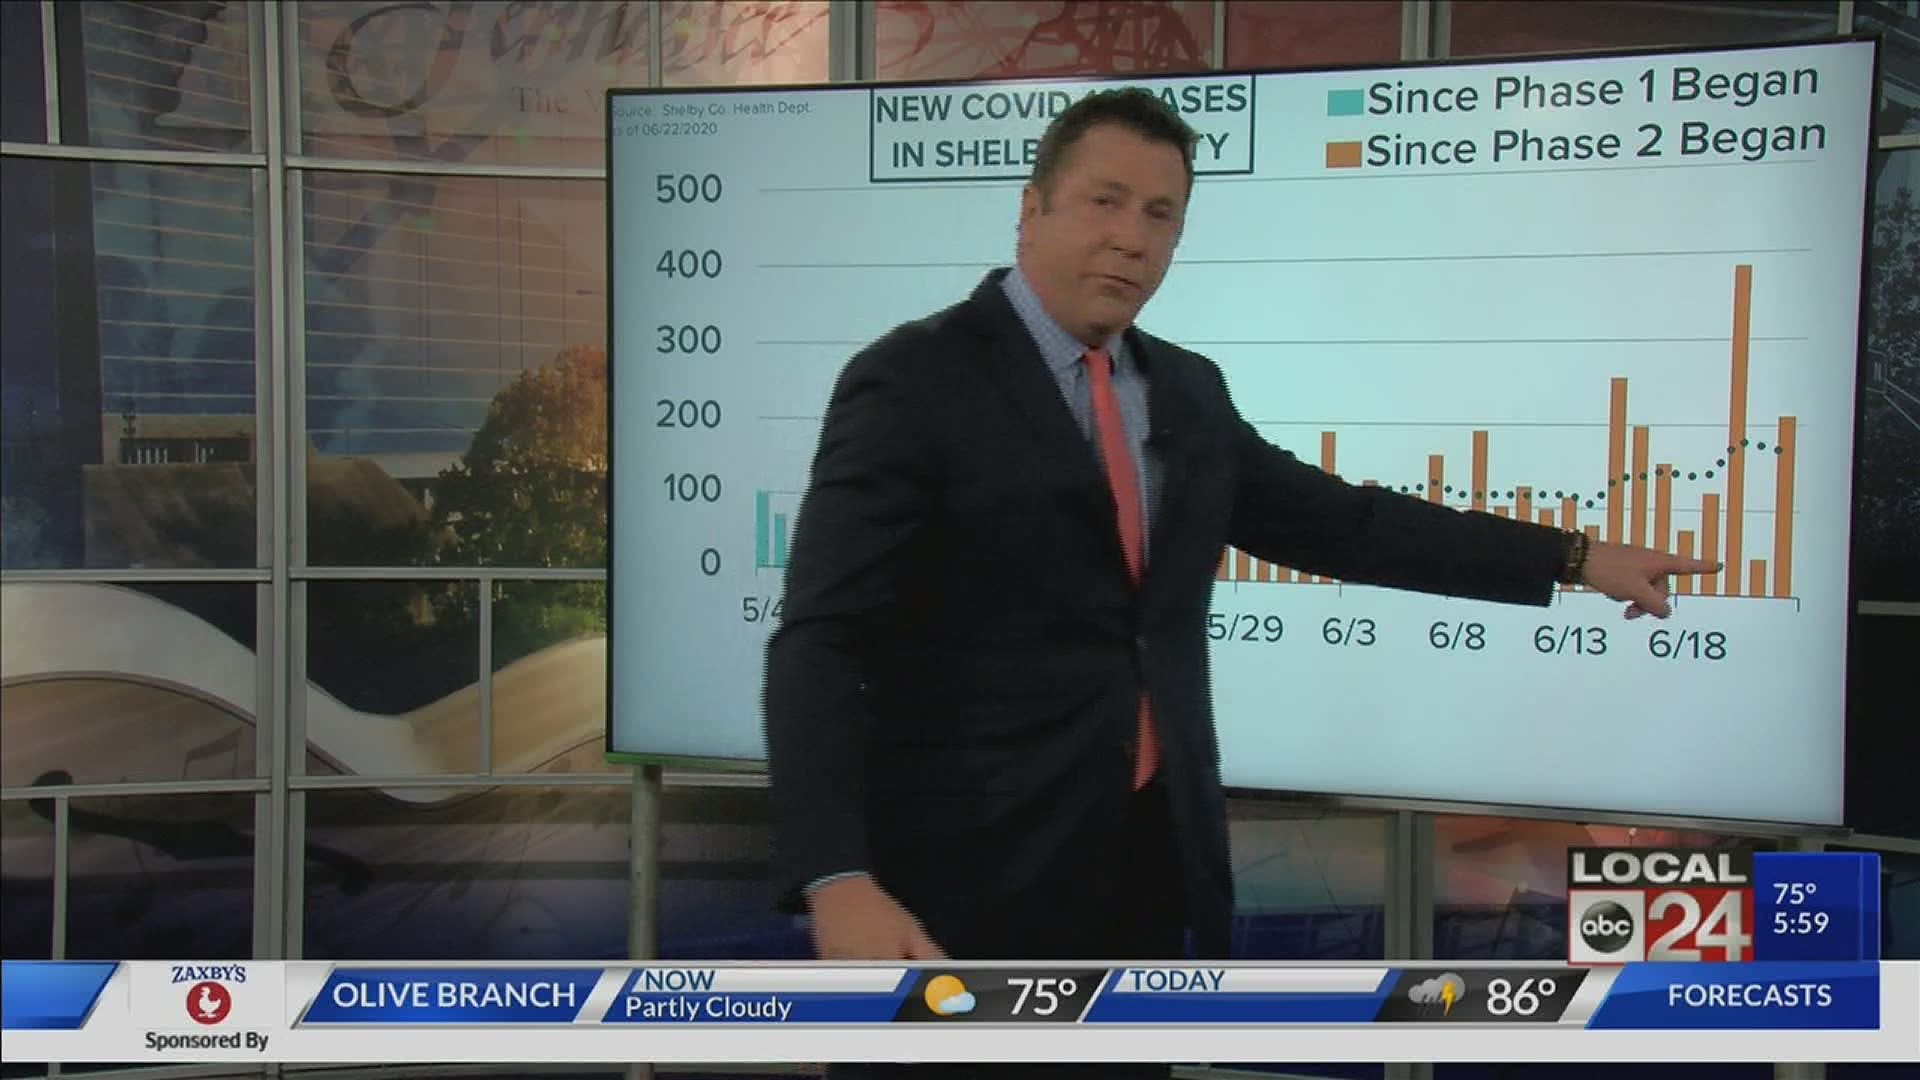 Local 24 News Anchor Richard Ransom is breaking down the latest COVID-19 data for the Mid-South and what it means.